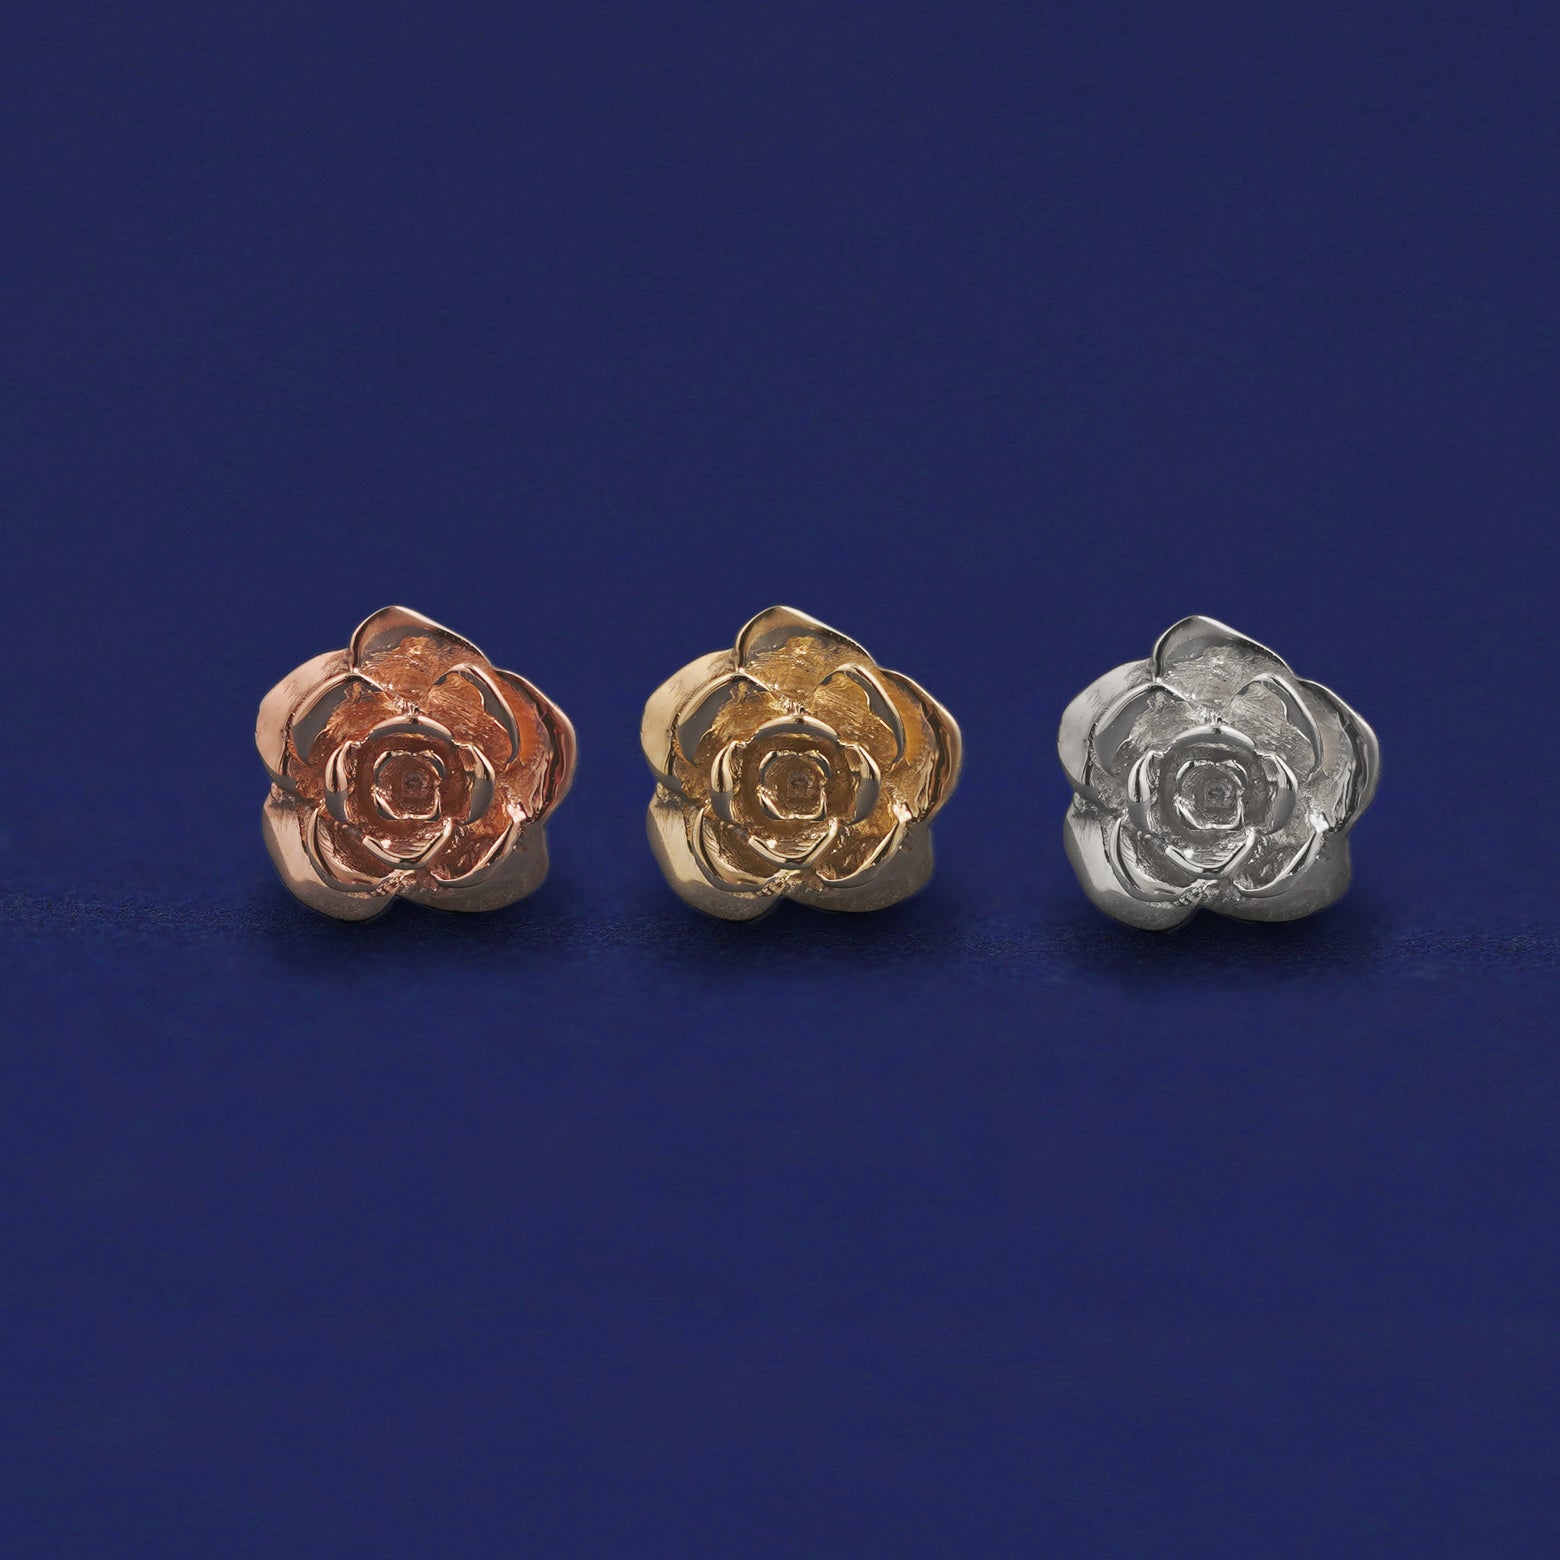 Three versions of a Rose Earring shown in options of rose, yellow, and white gold